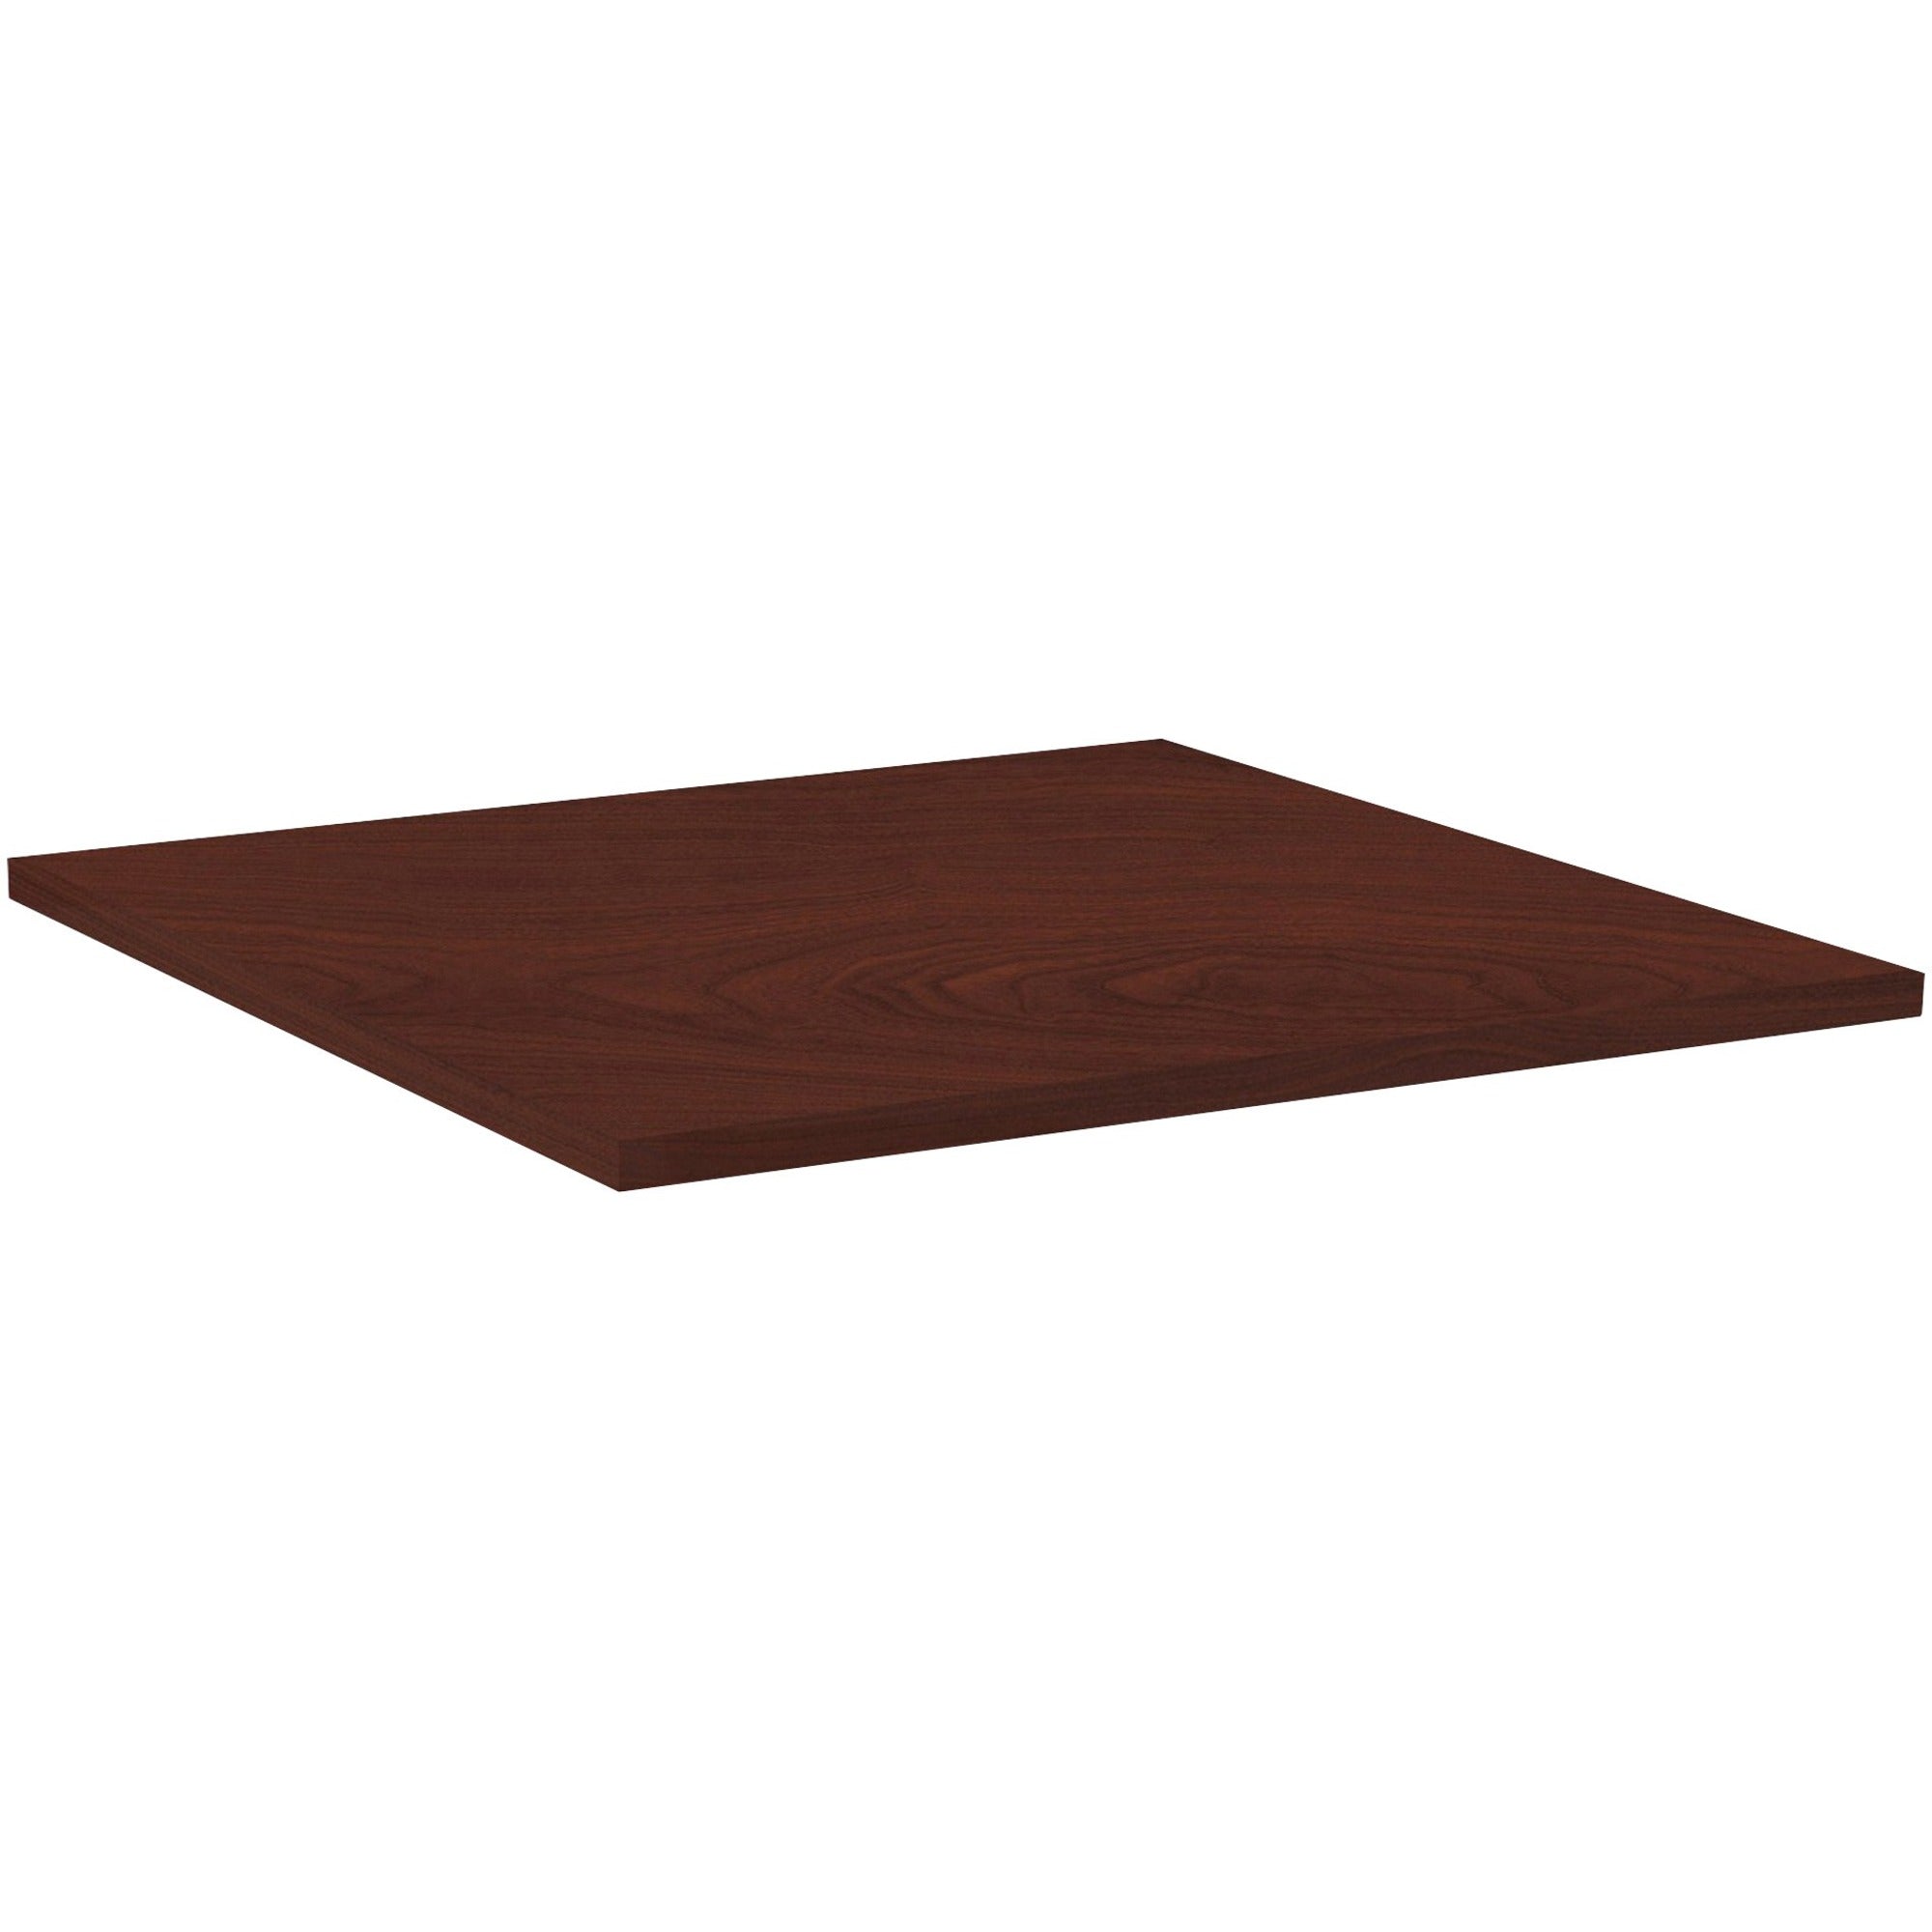 Lorell Hospitality Collection Tabletop - For - Table TopSquare Top - 42" Table Top Length x 42" Table Top Width x 1" Table Top Thickness - Assembly Required - High Pressure Laminate (HPL), Mahogany - 1 Each - 